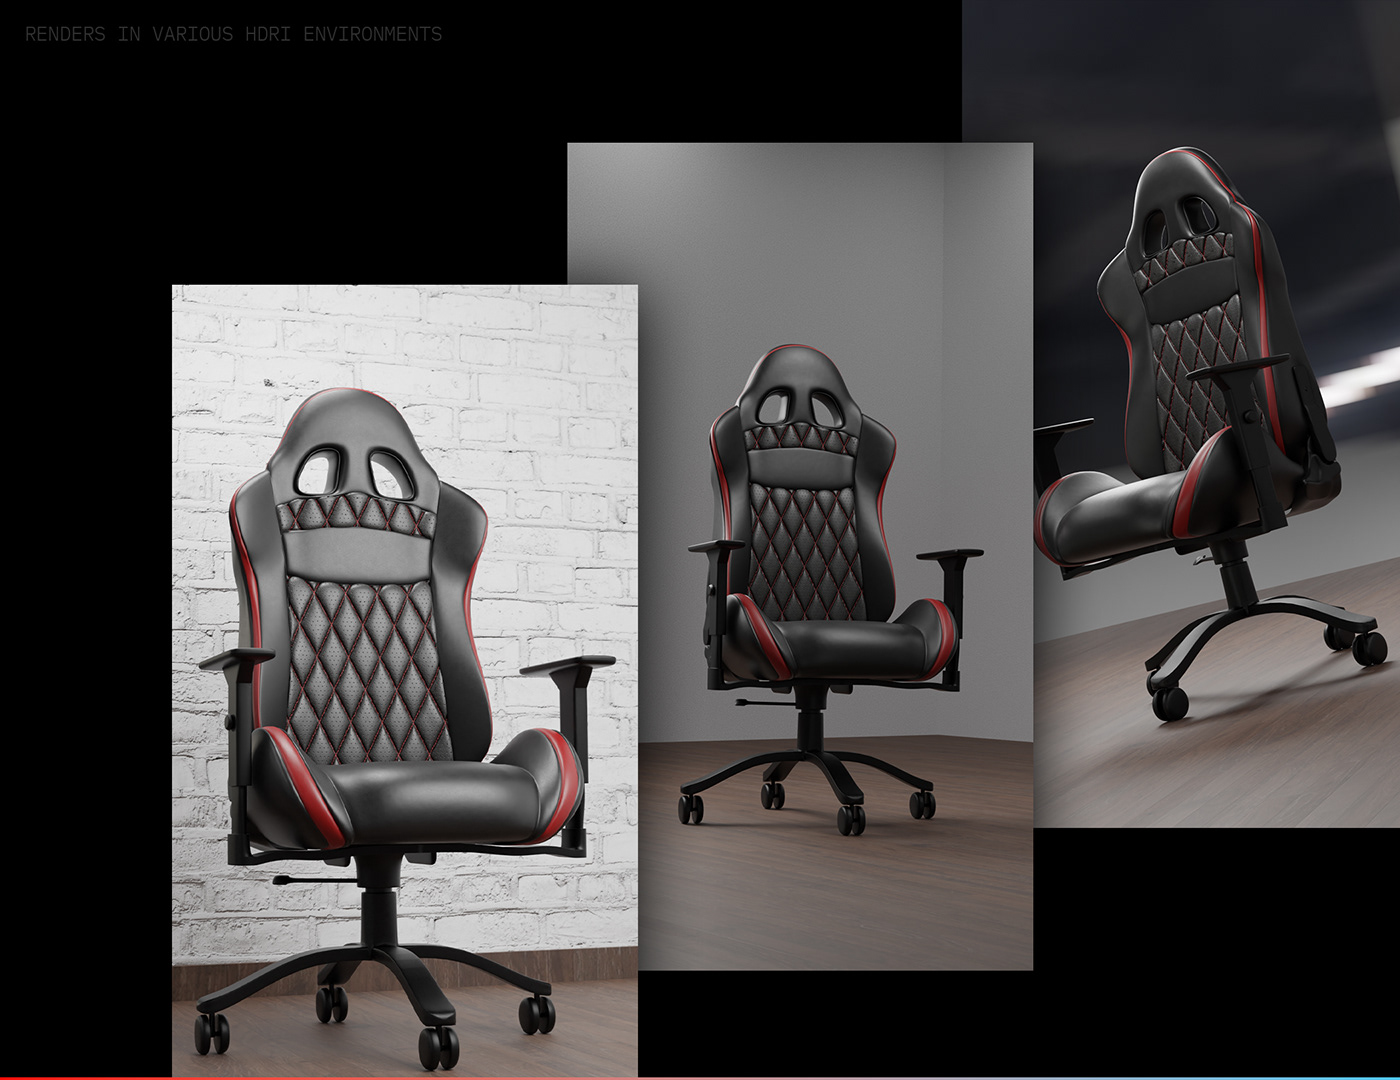 3 various images of gaming chairs